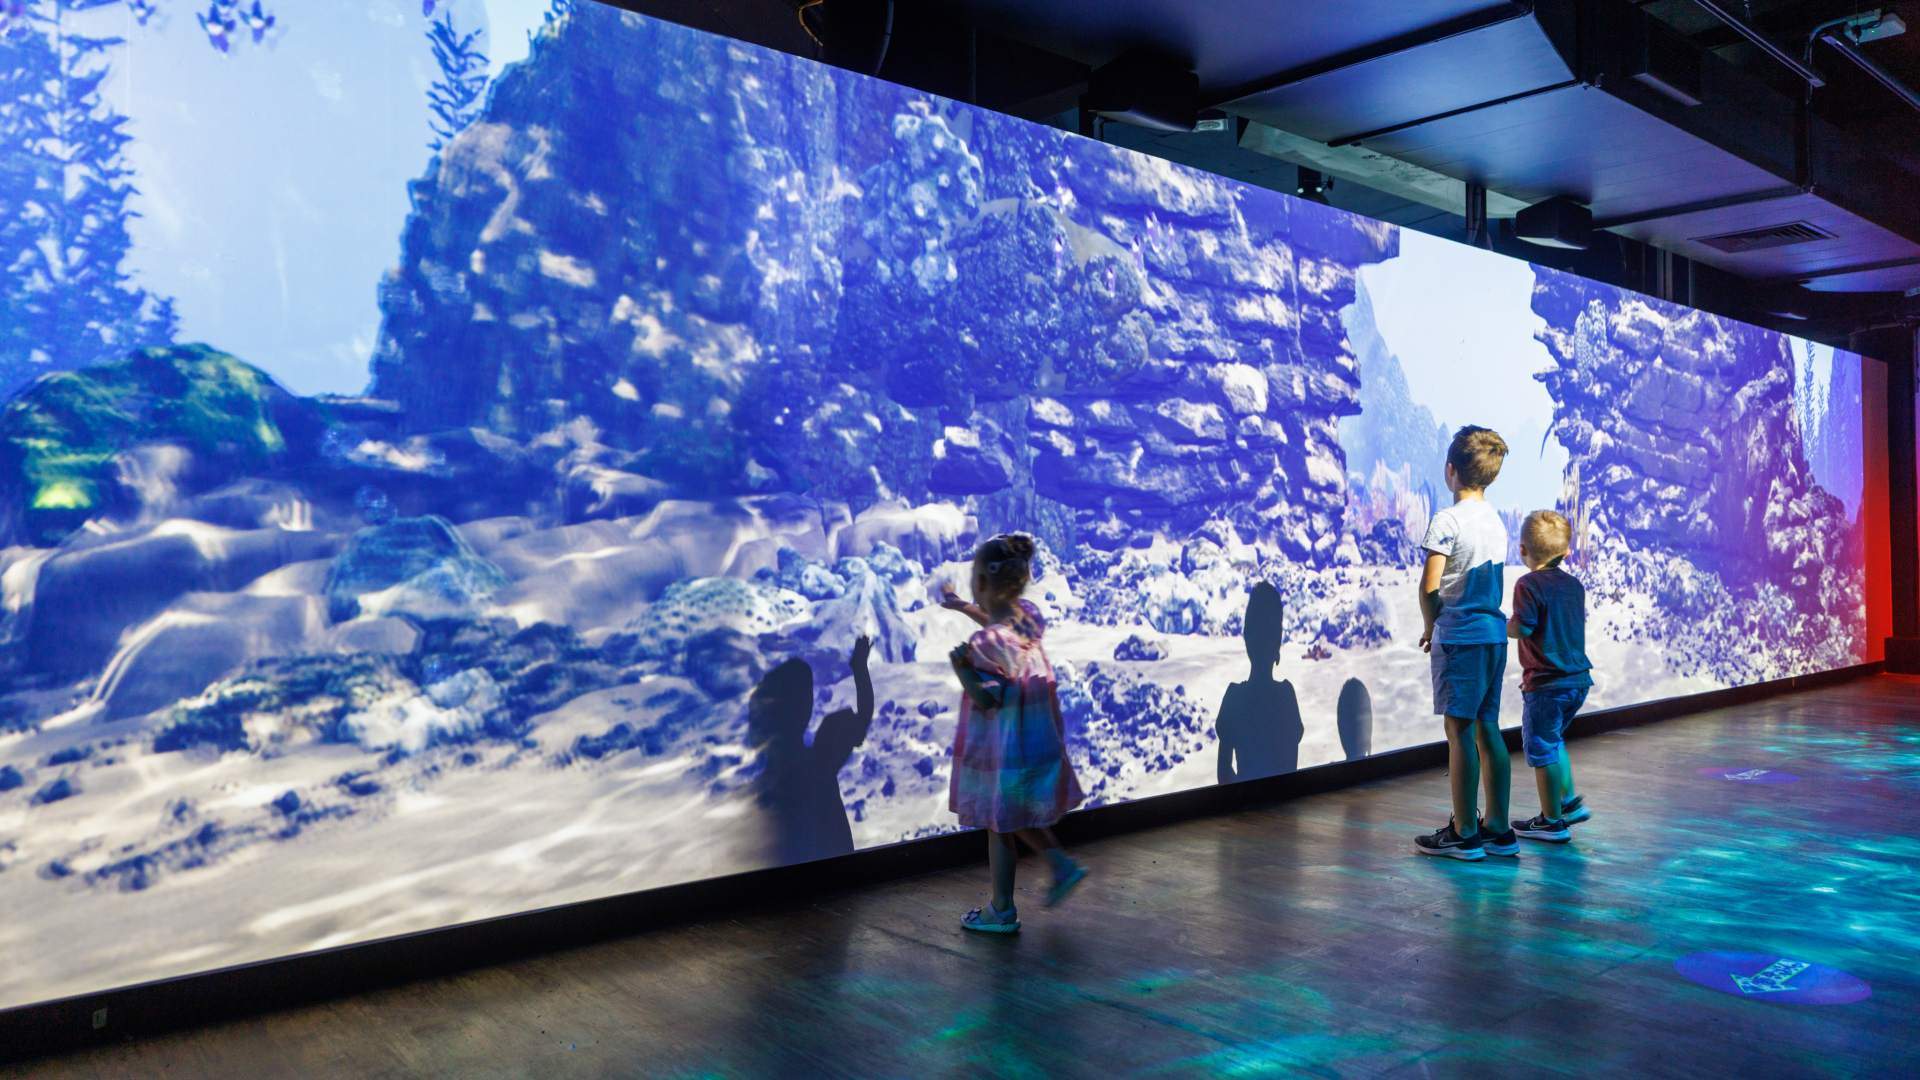 Melbourne Aquarium's New Giant Digital Exhibition Will Take You Deep Below the Ocean's Surface